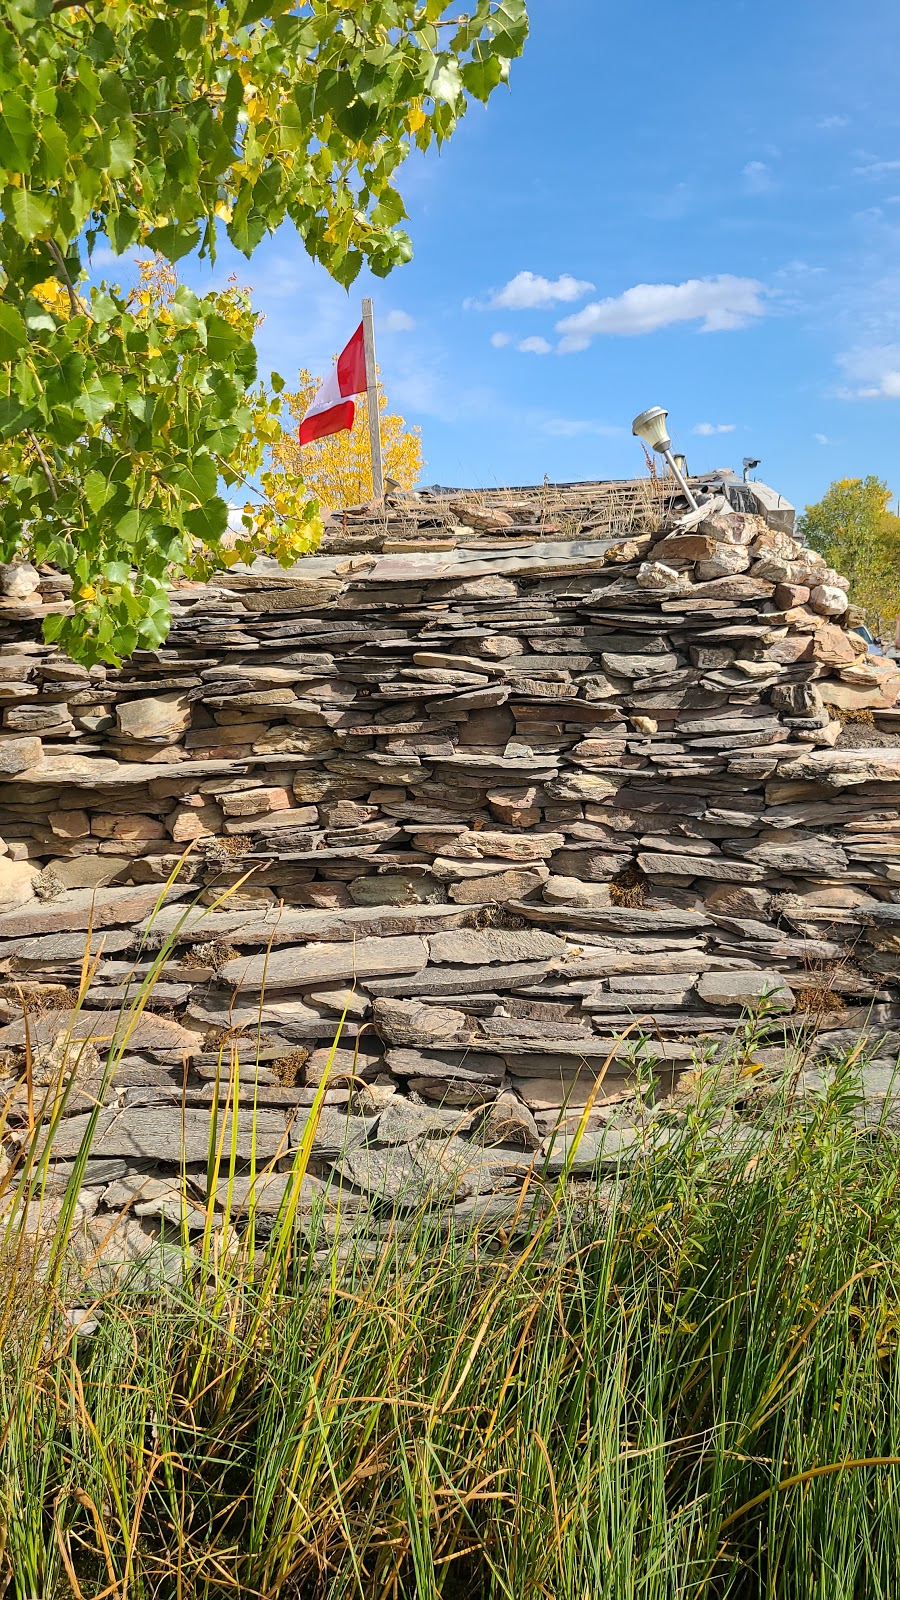 Pyramid Rock Gardening & Stone Suppliers | point of interest | 43 Cordite Rd, Winnipeg, MB R3W 1S1, Canada | 2047992999 OR +1 204-799-2999